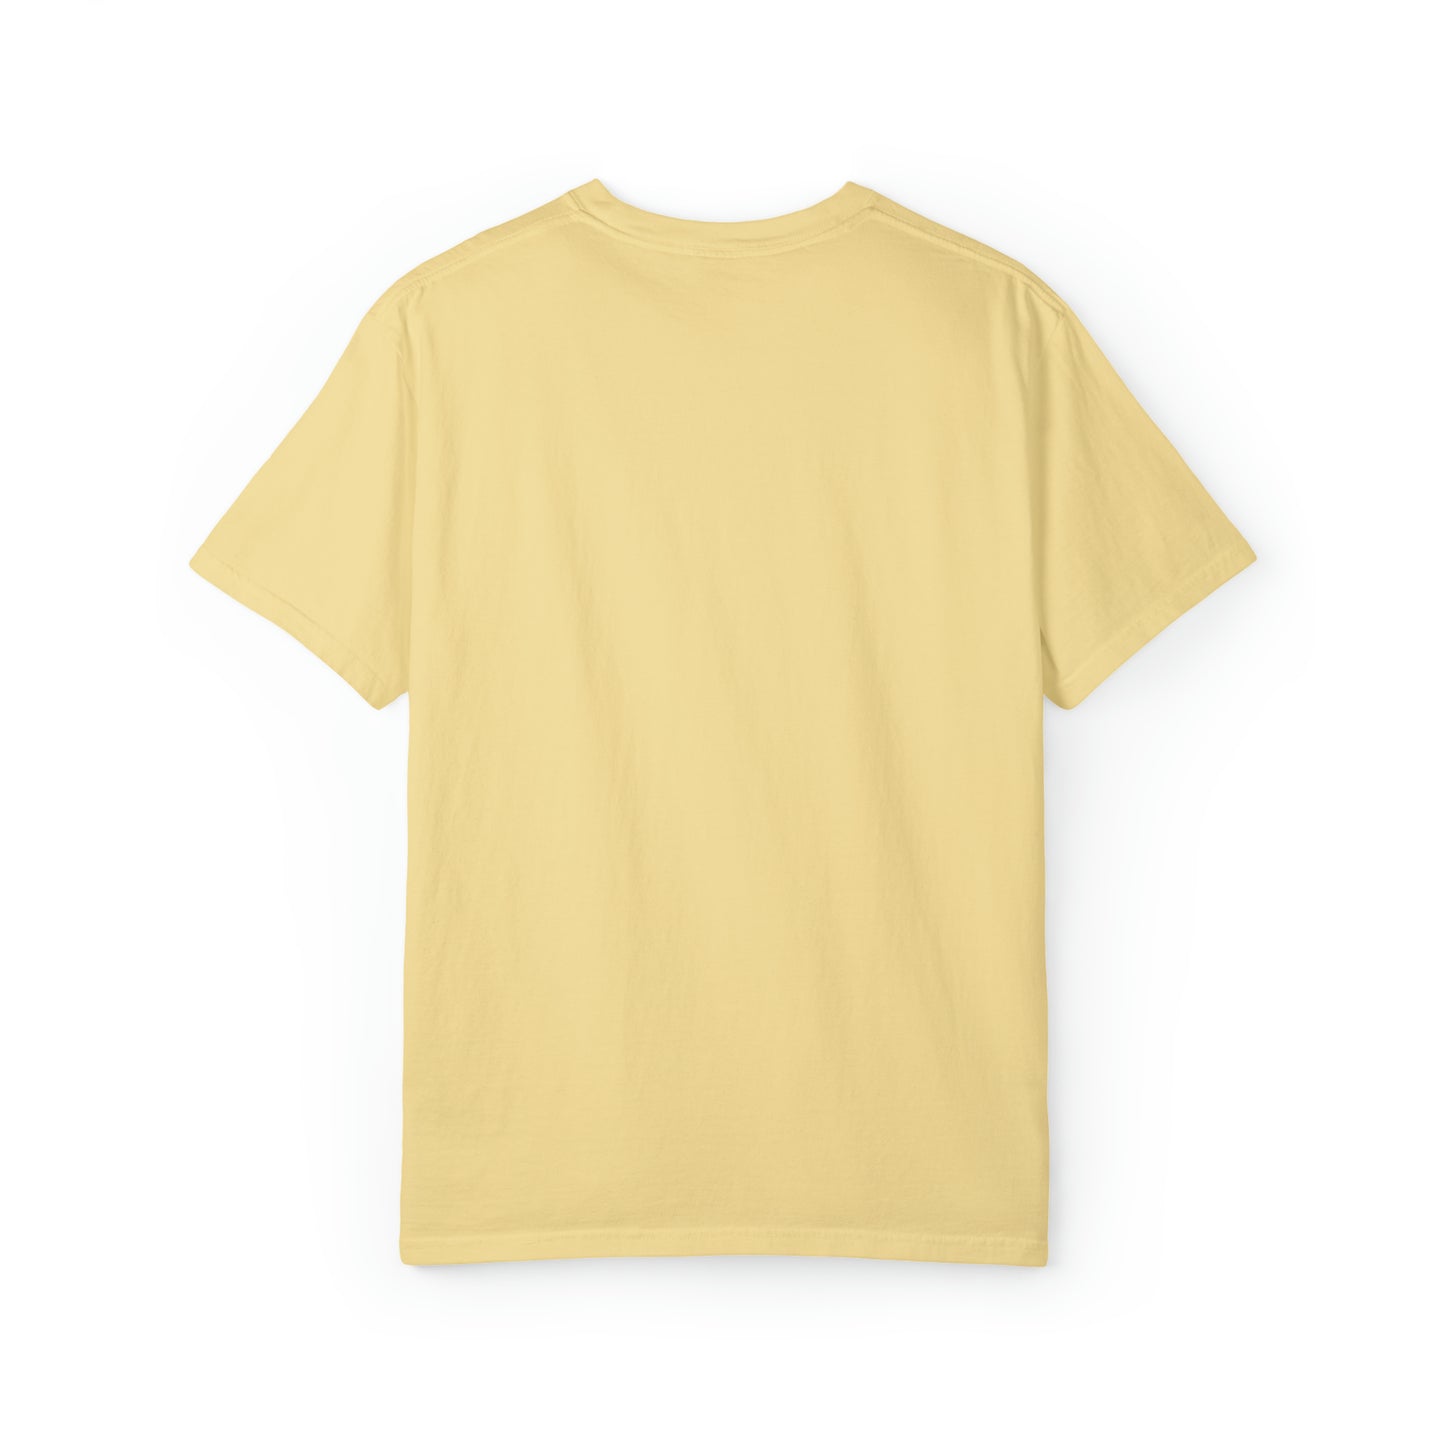 EERS-Unisex Garment-Dyed T-shirt